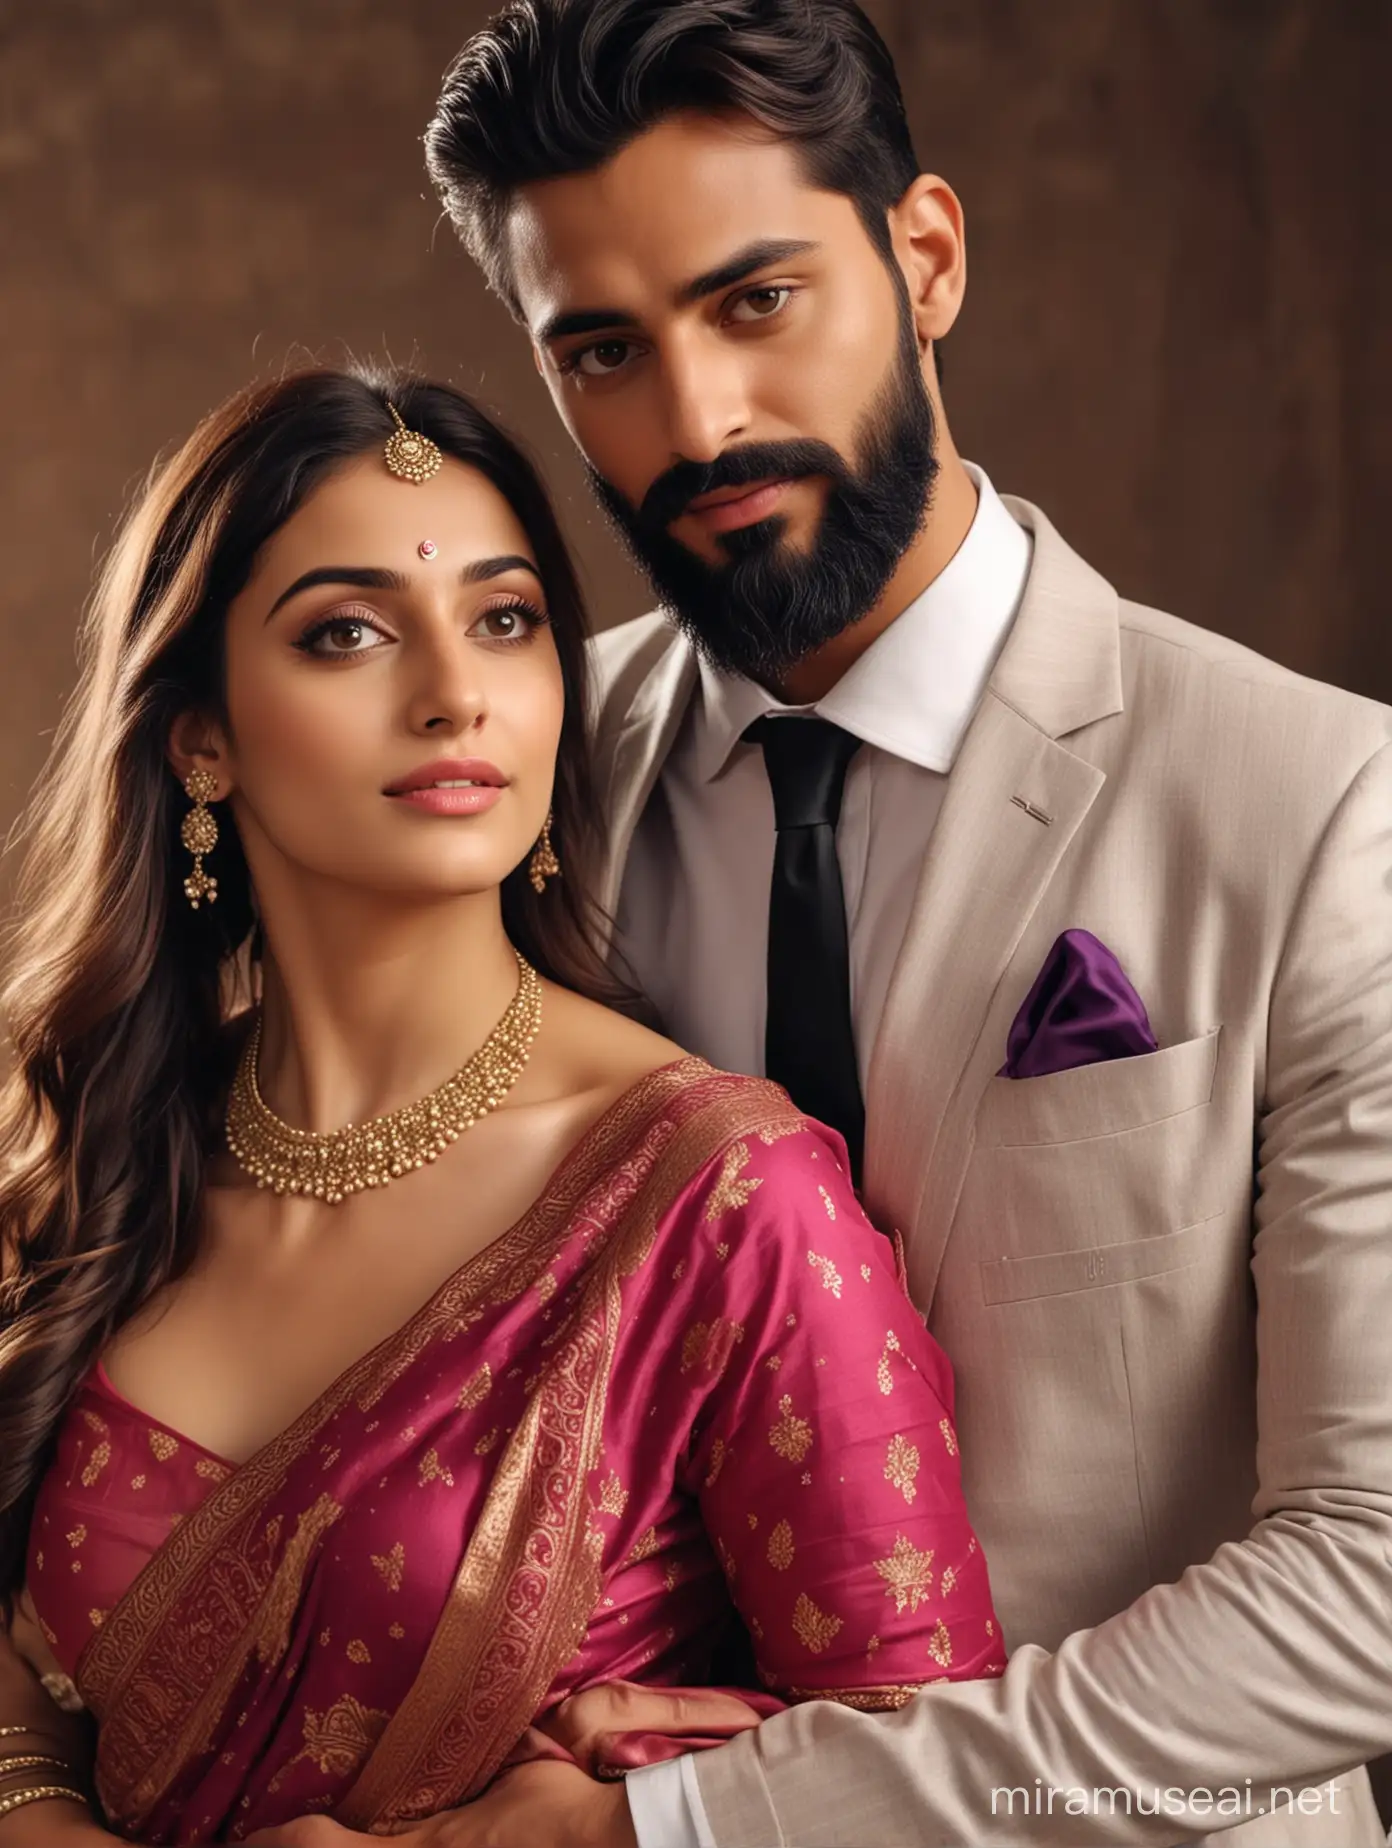 full photo os most beautiful european couple as most beautiful indian couple, most beautiful girl in saree, full makeup, holding man from back side, . hands around man neck from back of man, with emotional attachment and ecstasy, man with stylish beard and in  formals and tie, photo realistic, 4k.